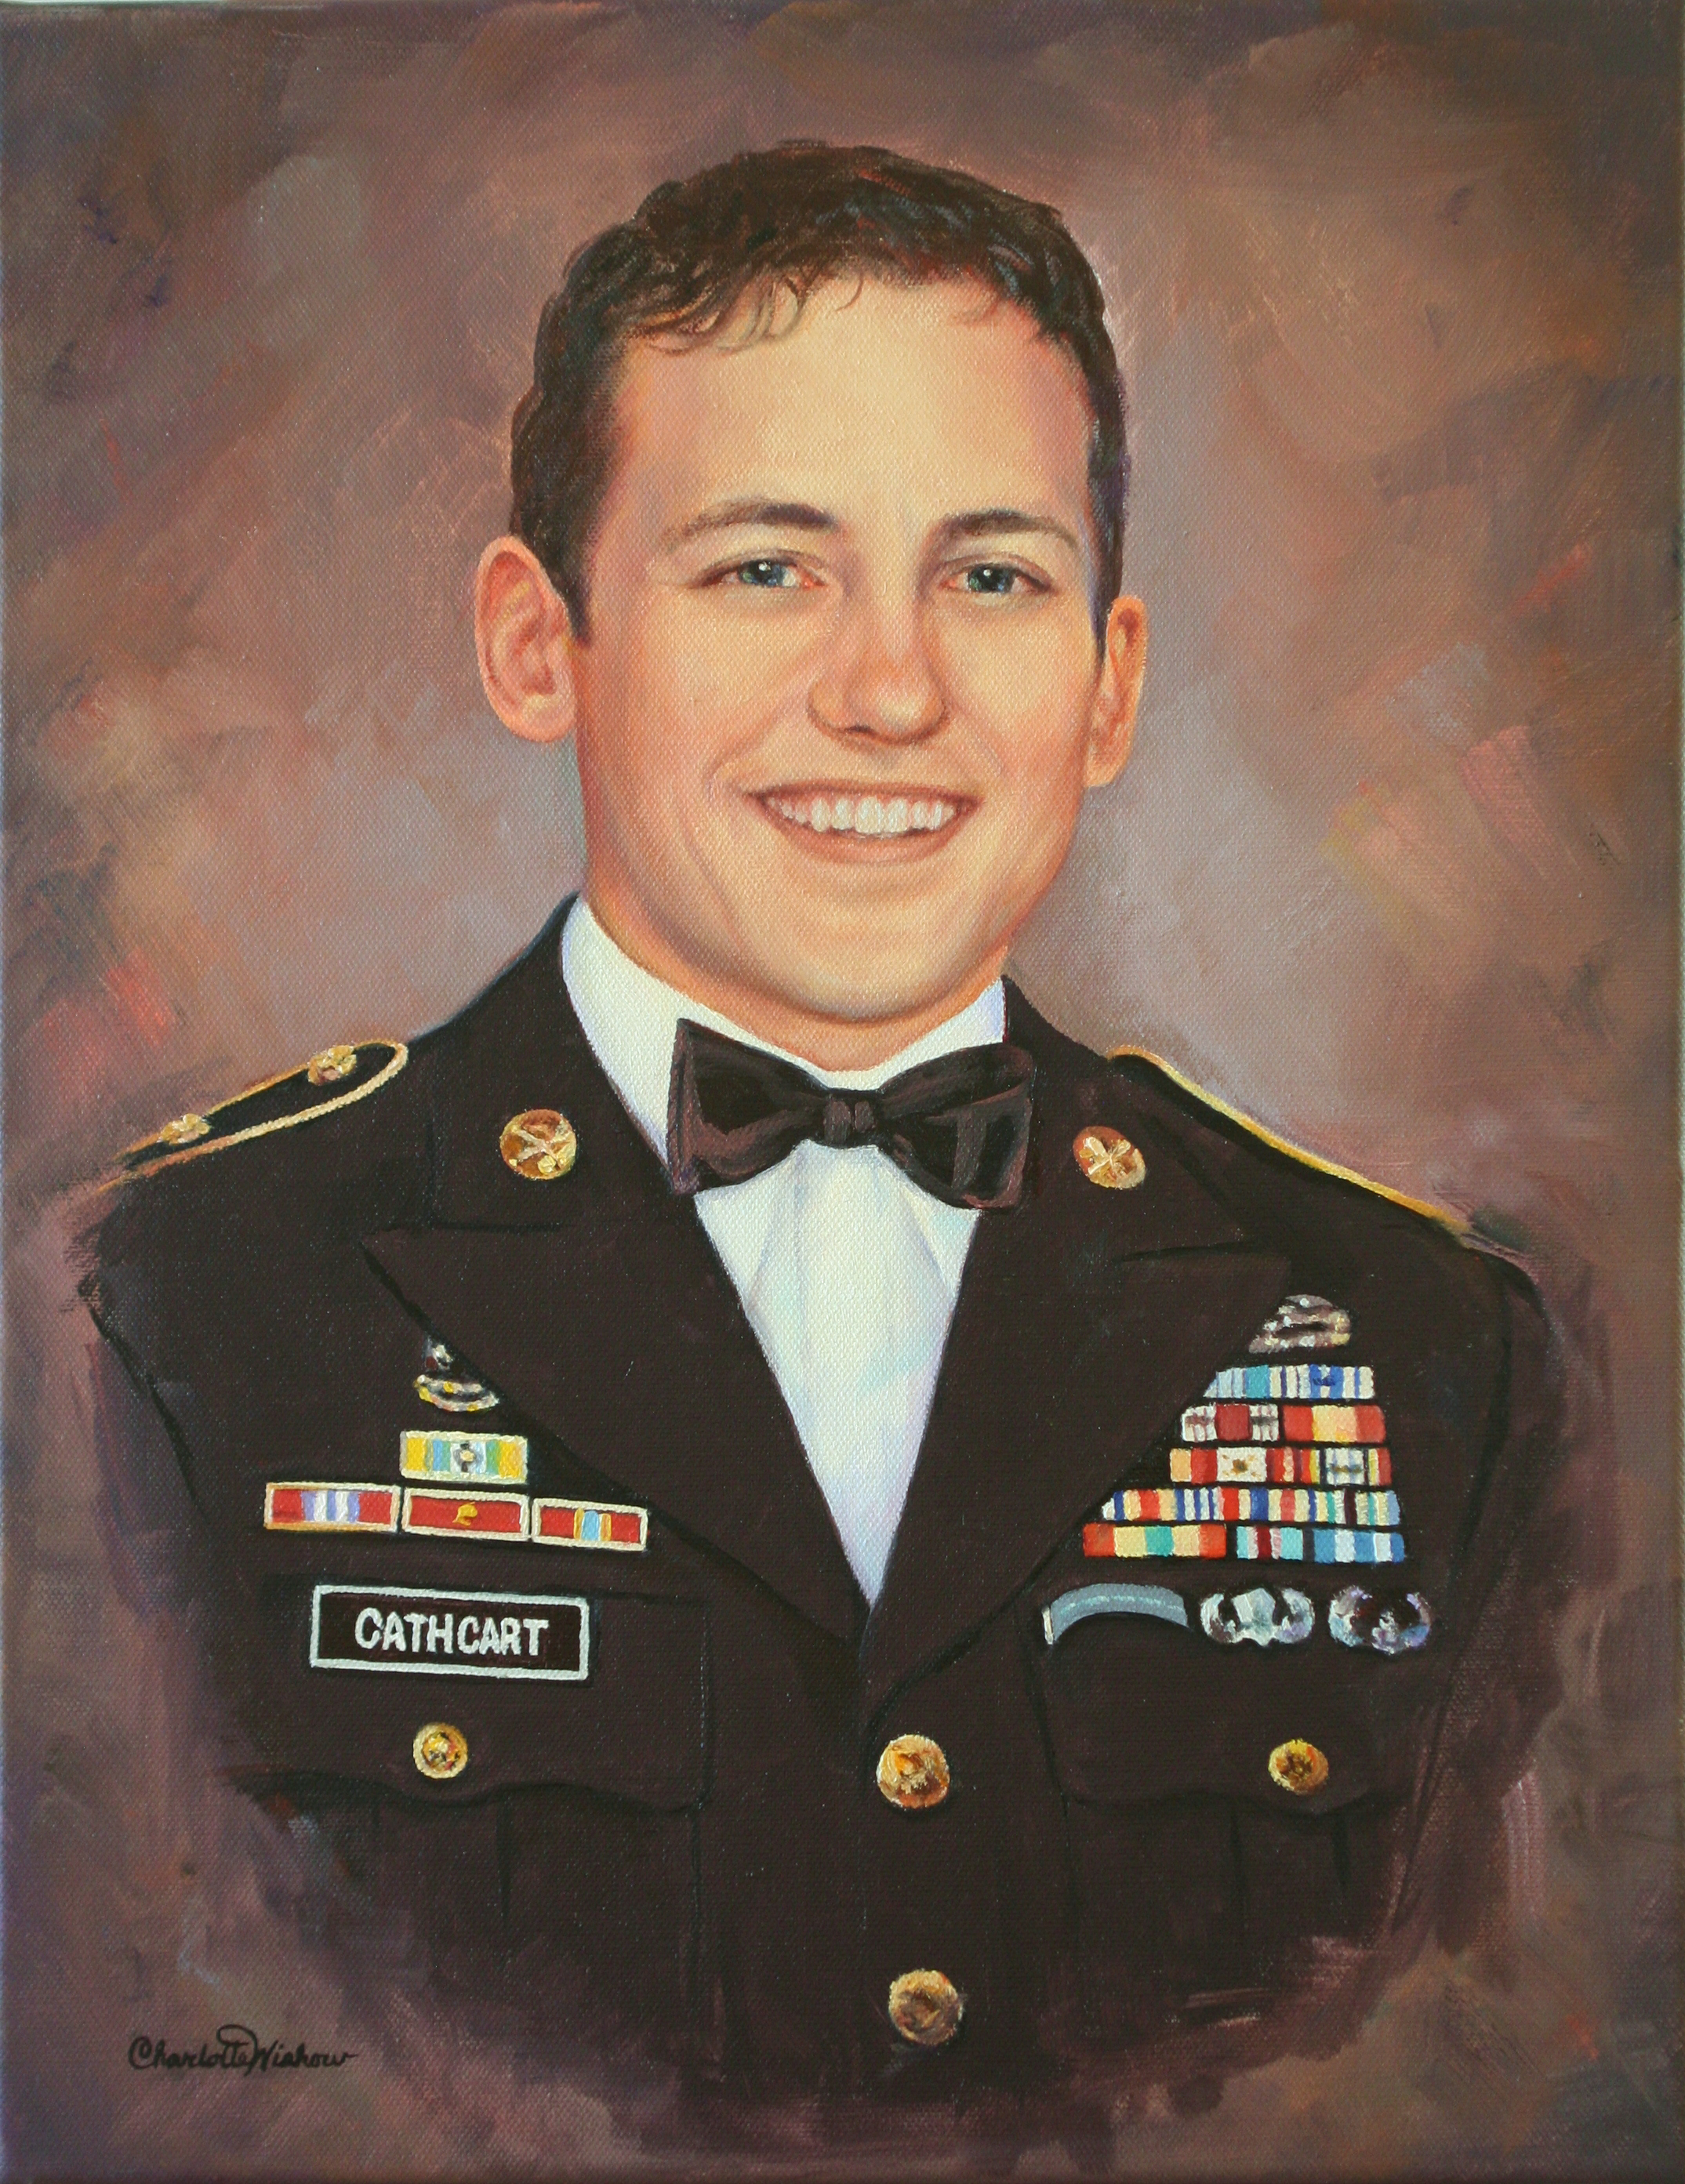 Fallen Hero SFC Michael A. Cathcart, United States Army” title=